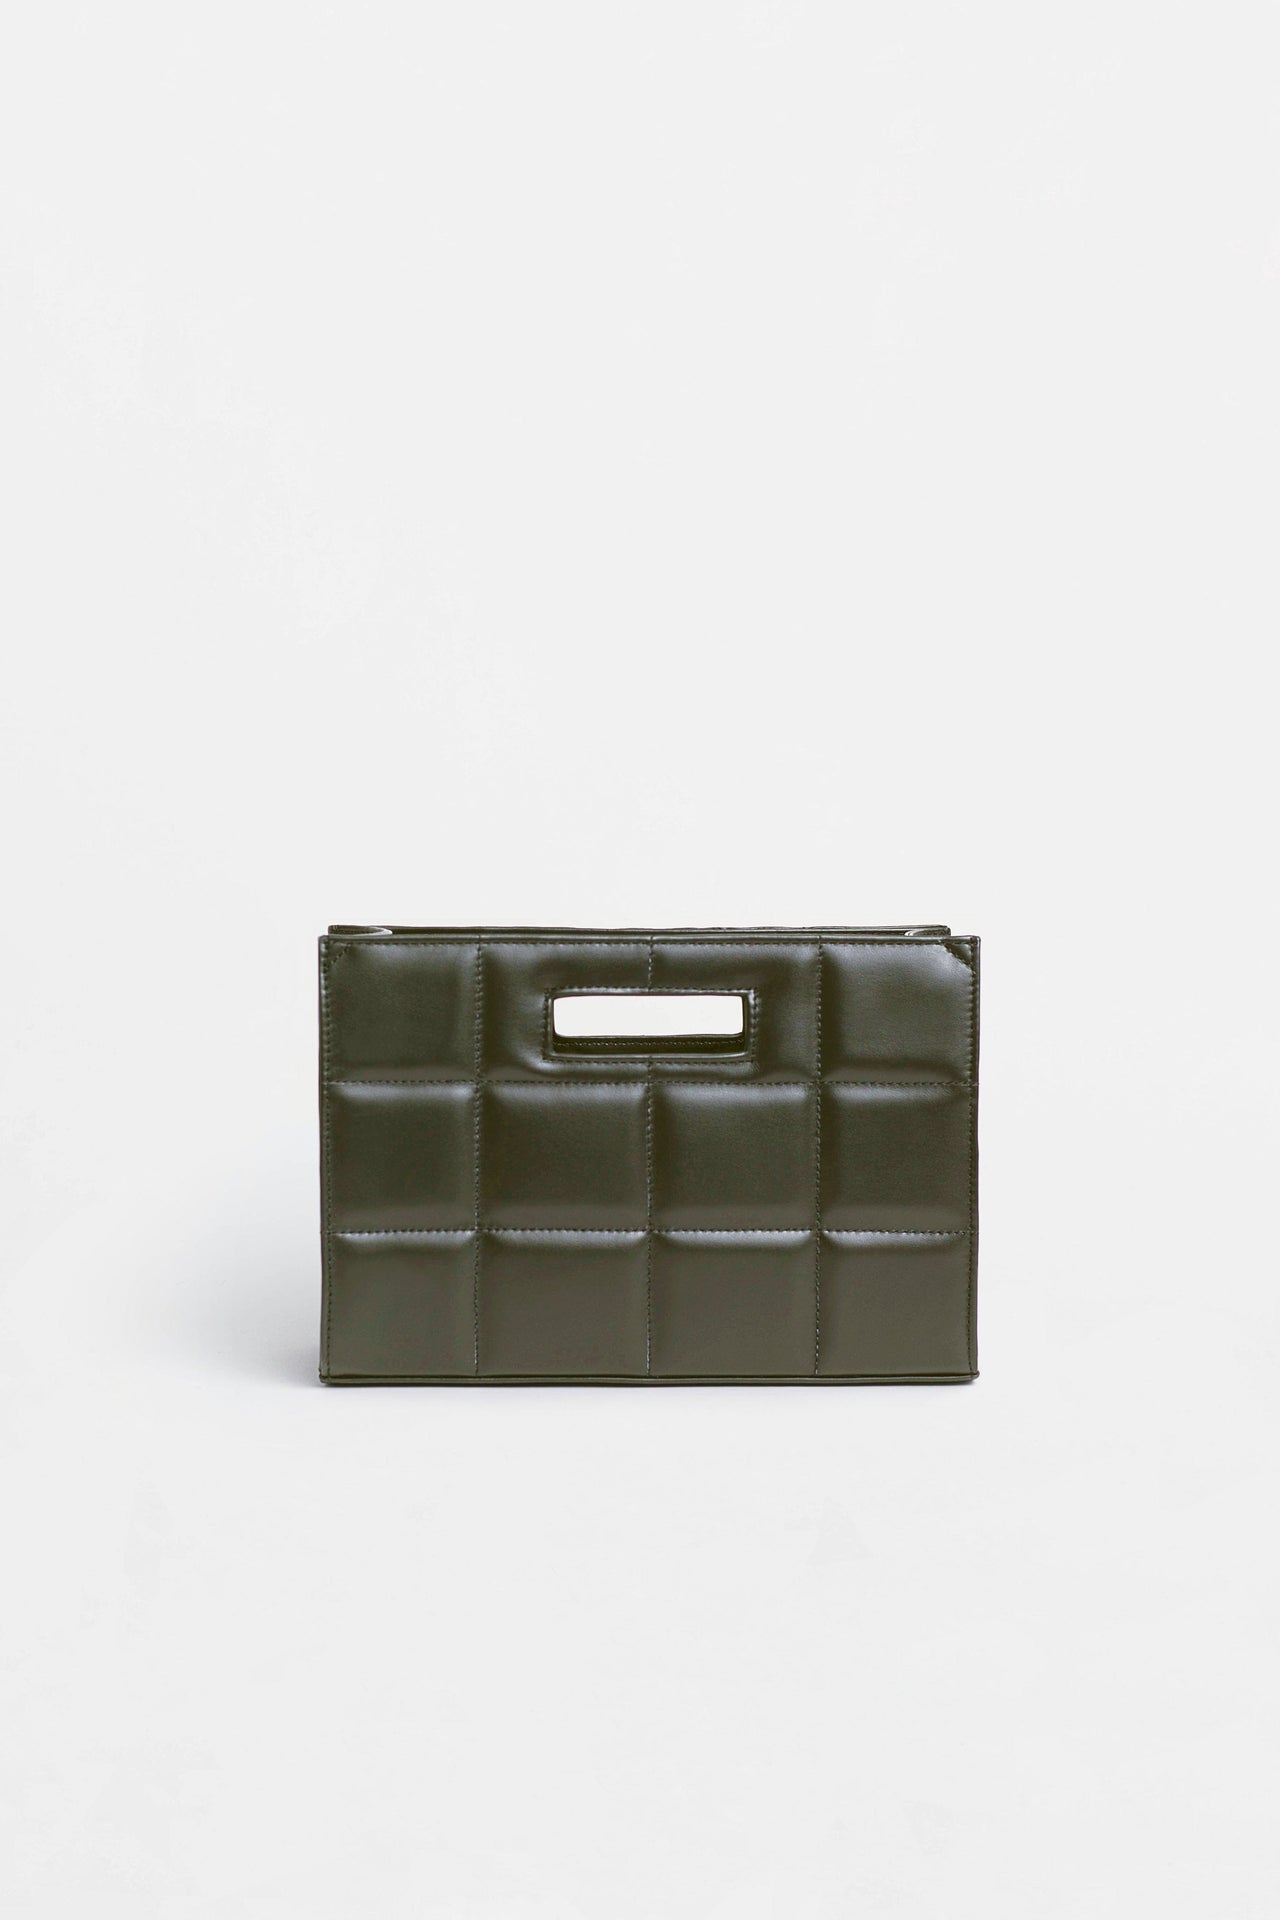 The QUILTED BAG SMALL Olive - JULIA SKERGETH